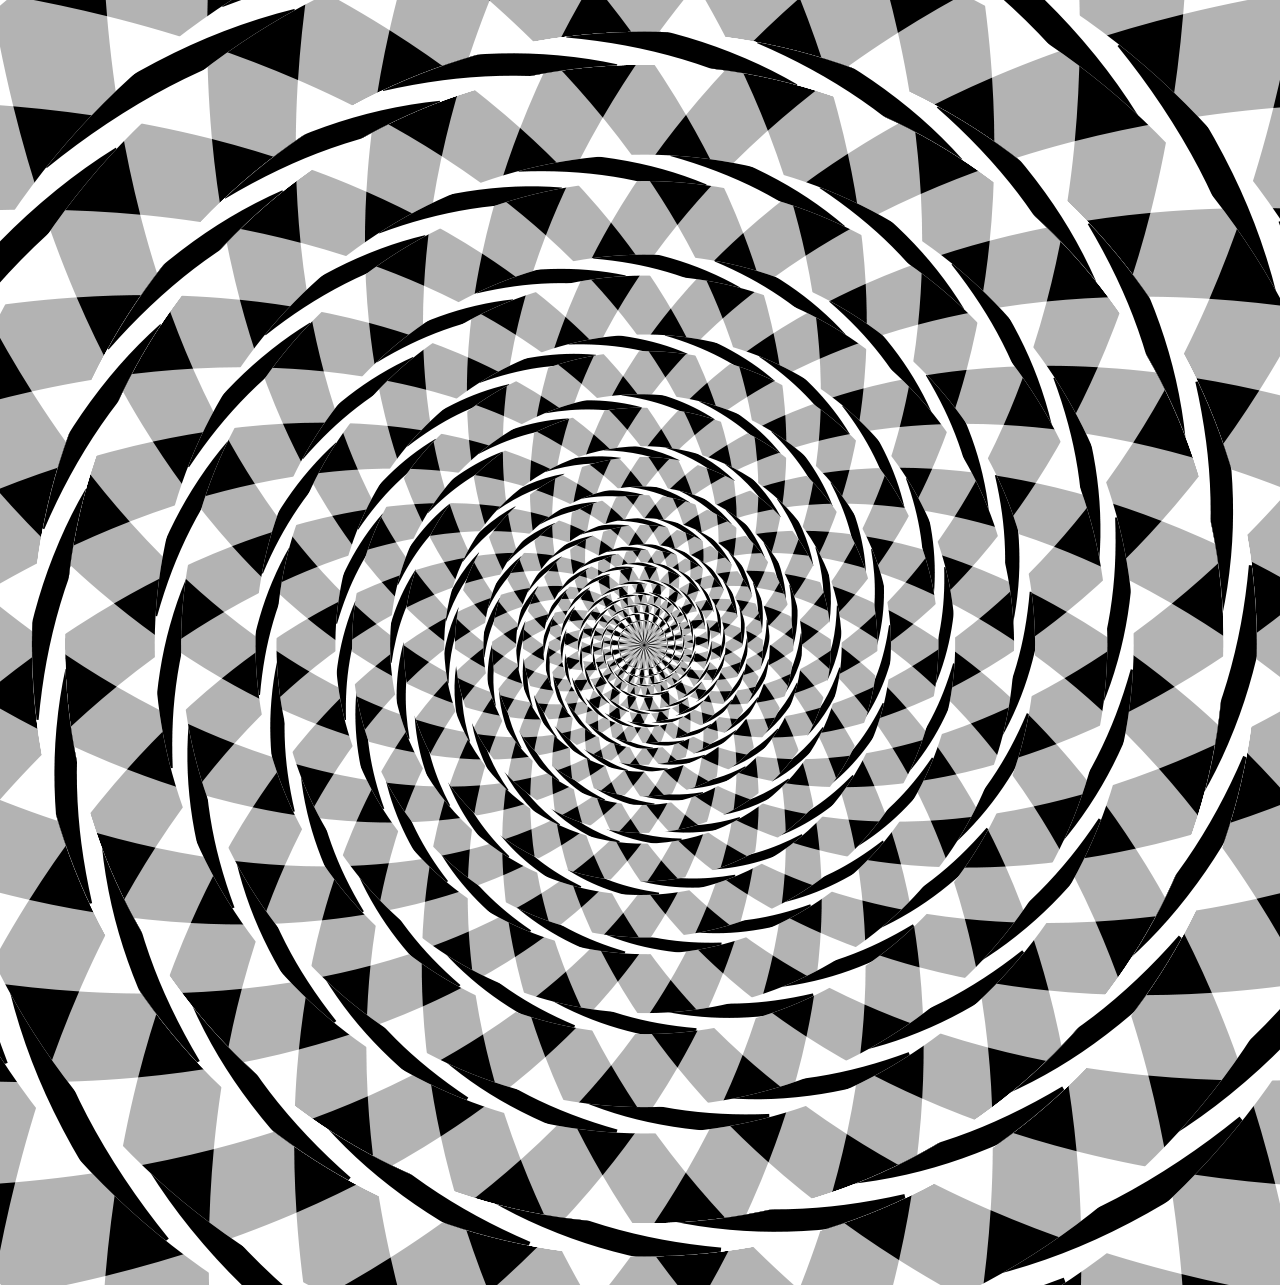 an optical illusion known as the Fraser spiral